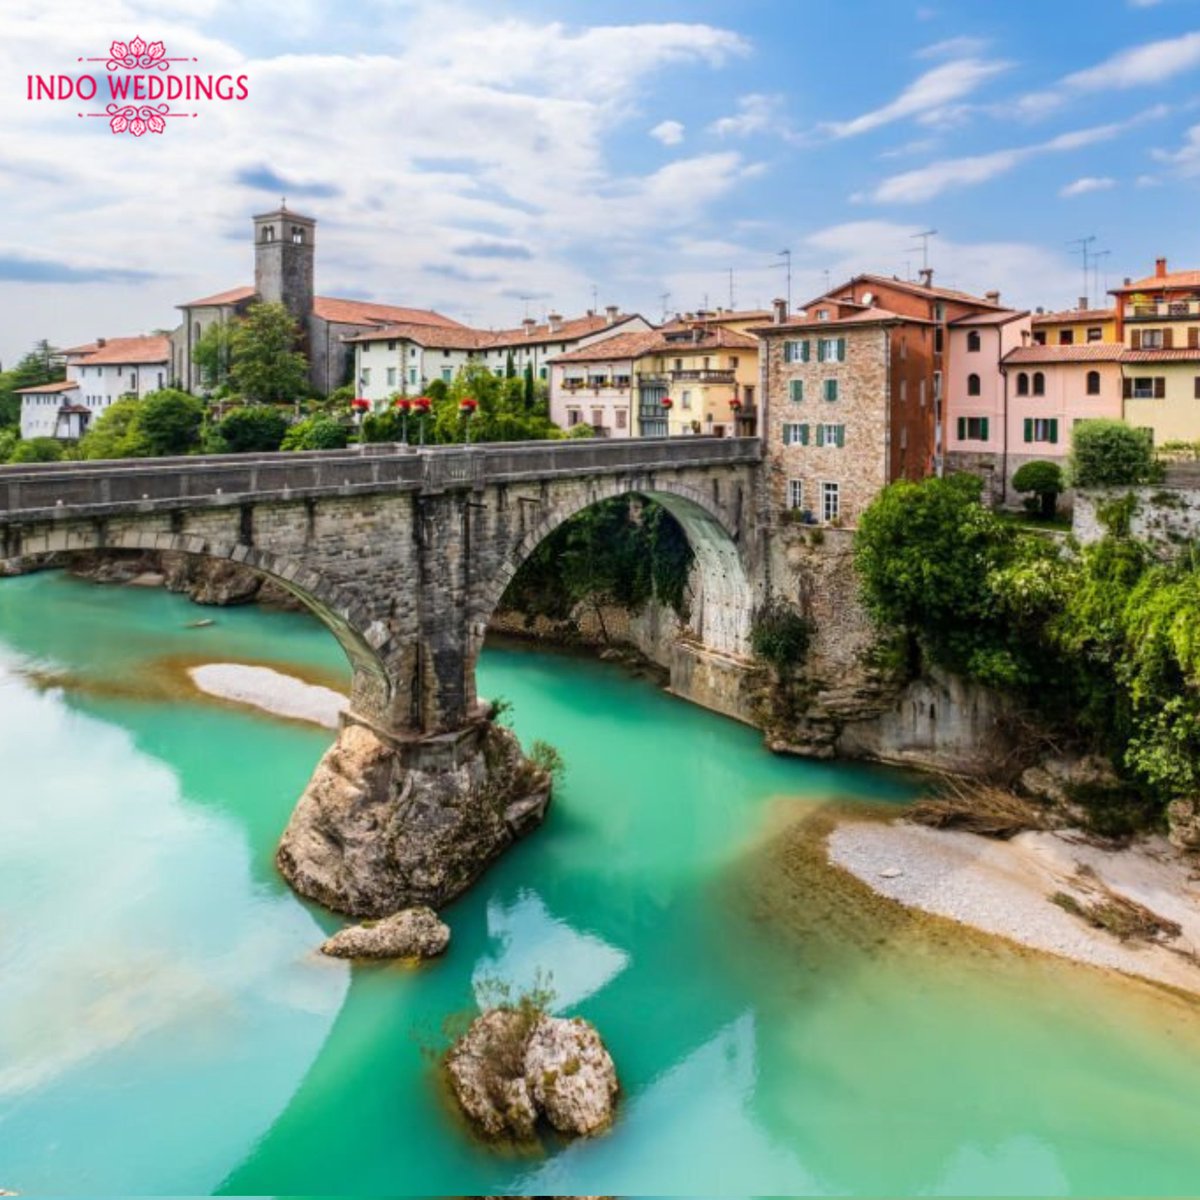 There is a Region in Italy called ' Friuli Venezia Giulia ''. It's in the north and is simply mesmerizing. Perfect for those brides who are looking for a unique wedding location.
More Info feel free to call us +393393007592
#weddinginitaly🇮🇹